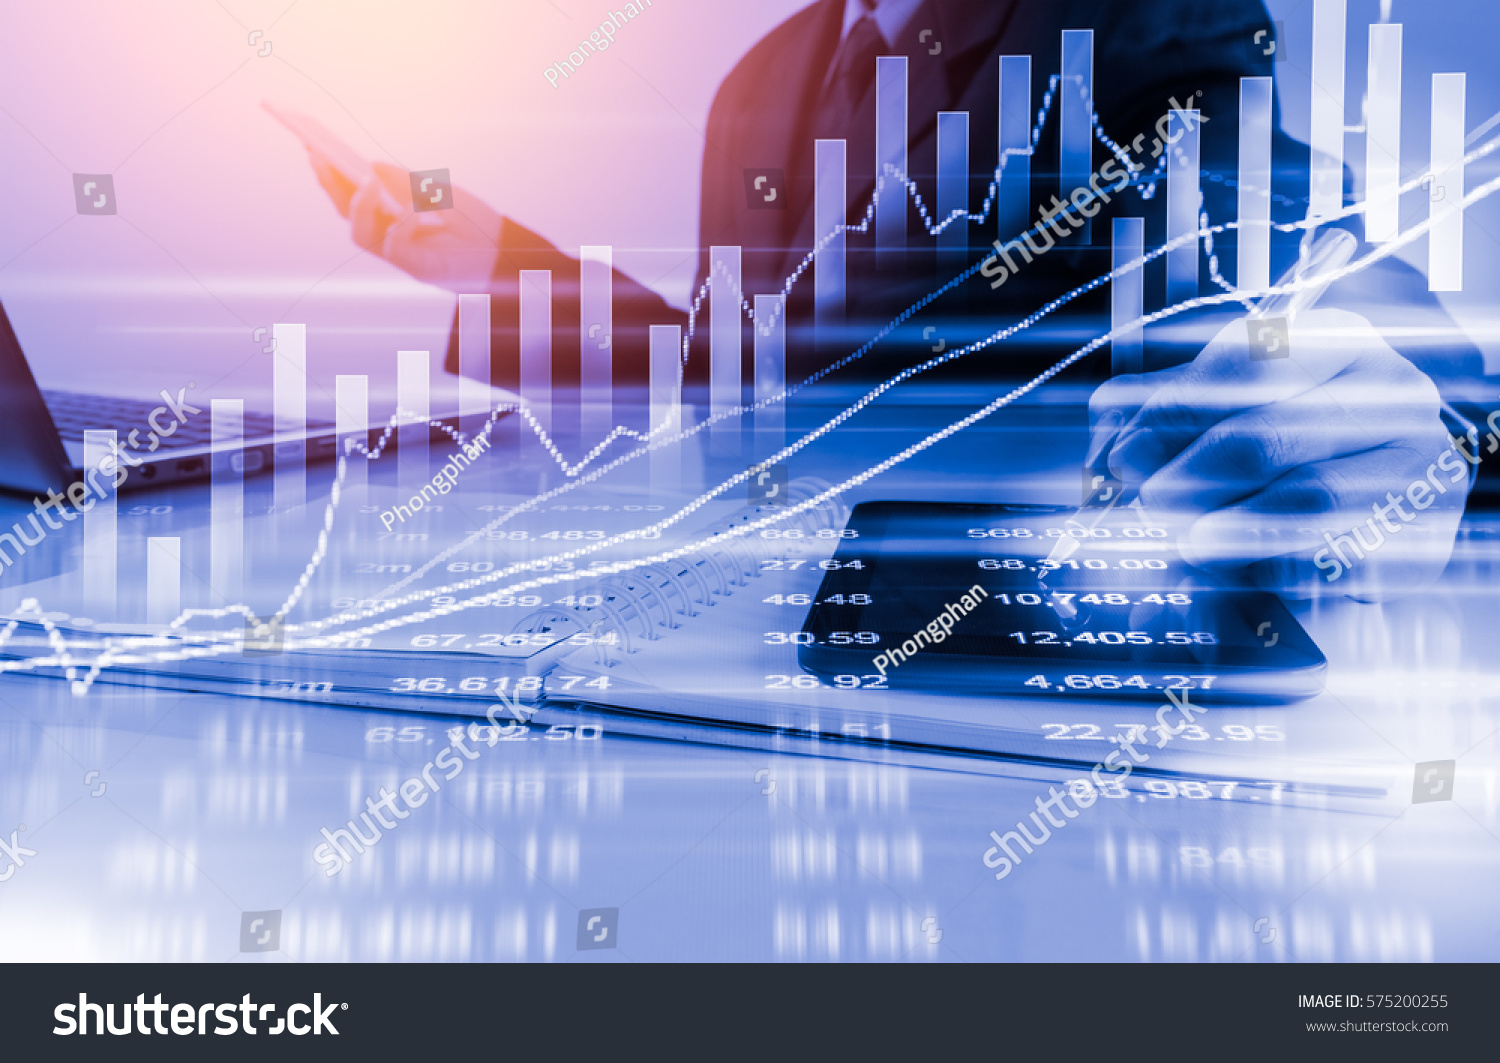 Double exposure businessman and stock market or forex graph suitable for financial investment concept. Economy trends background for business idea and all art work design. Abstract finance background. #575200255